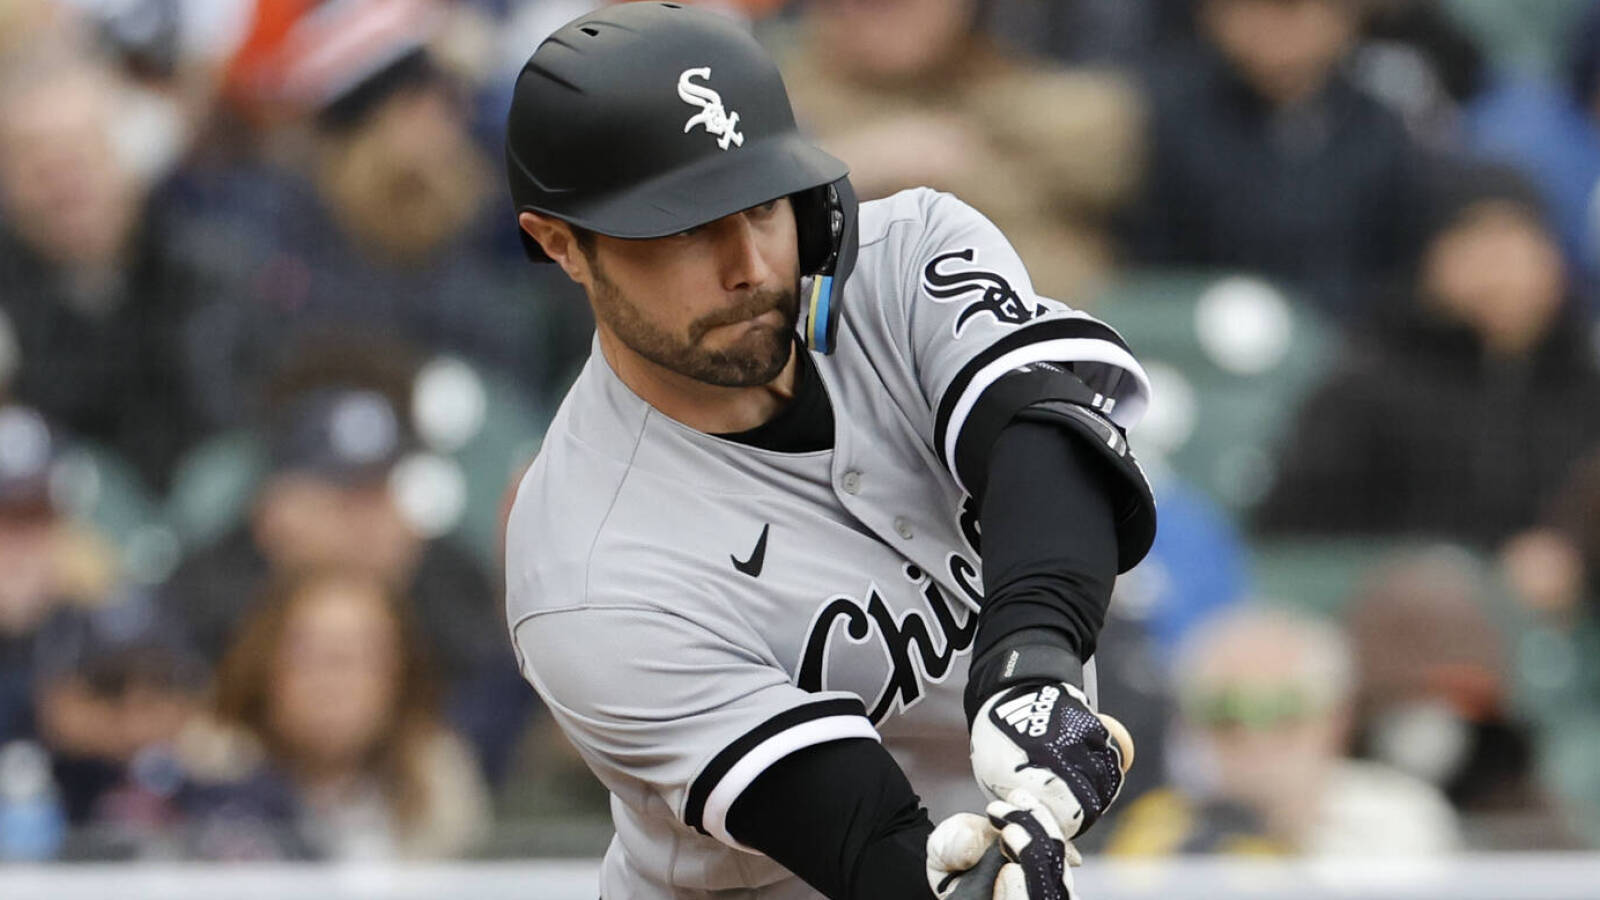 White Sox OF A.J. Pollock suffers injury ahead of planned